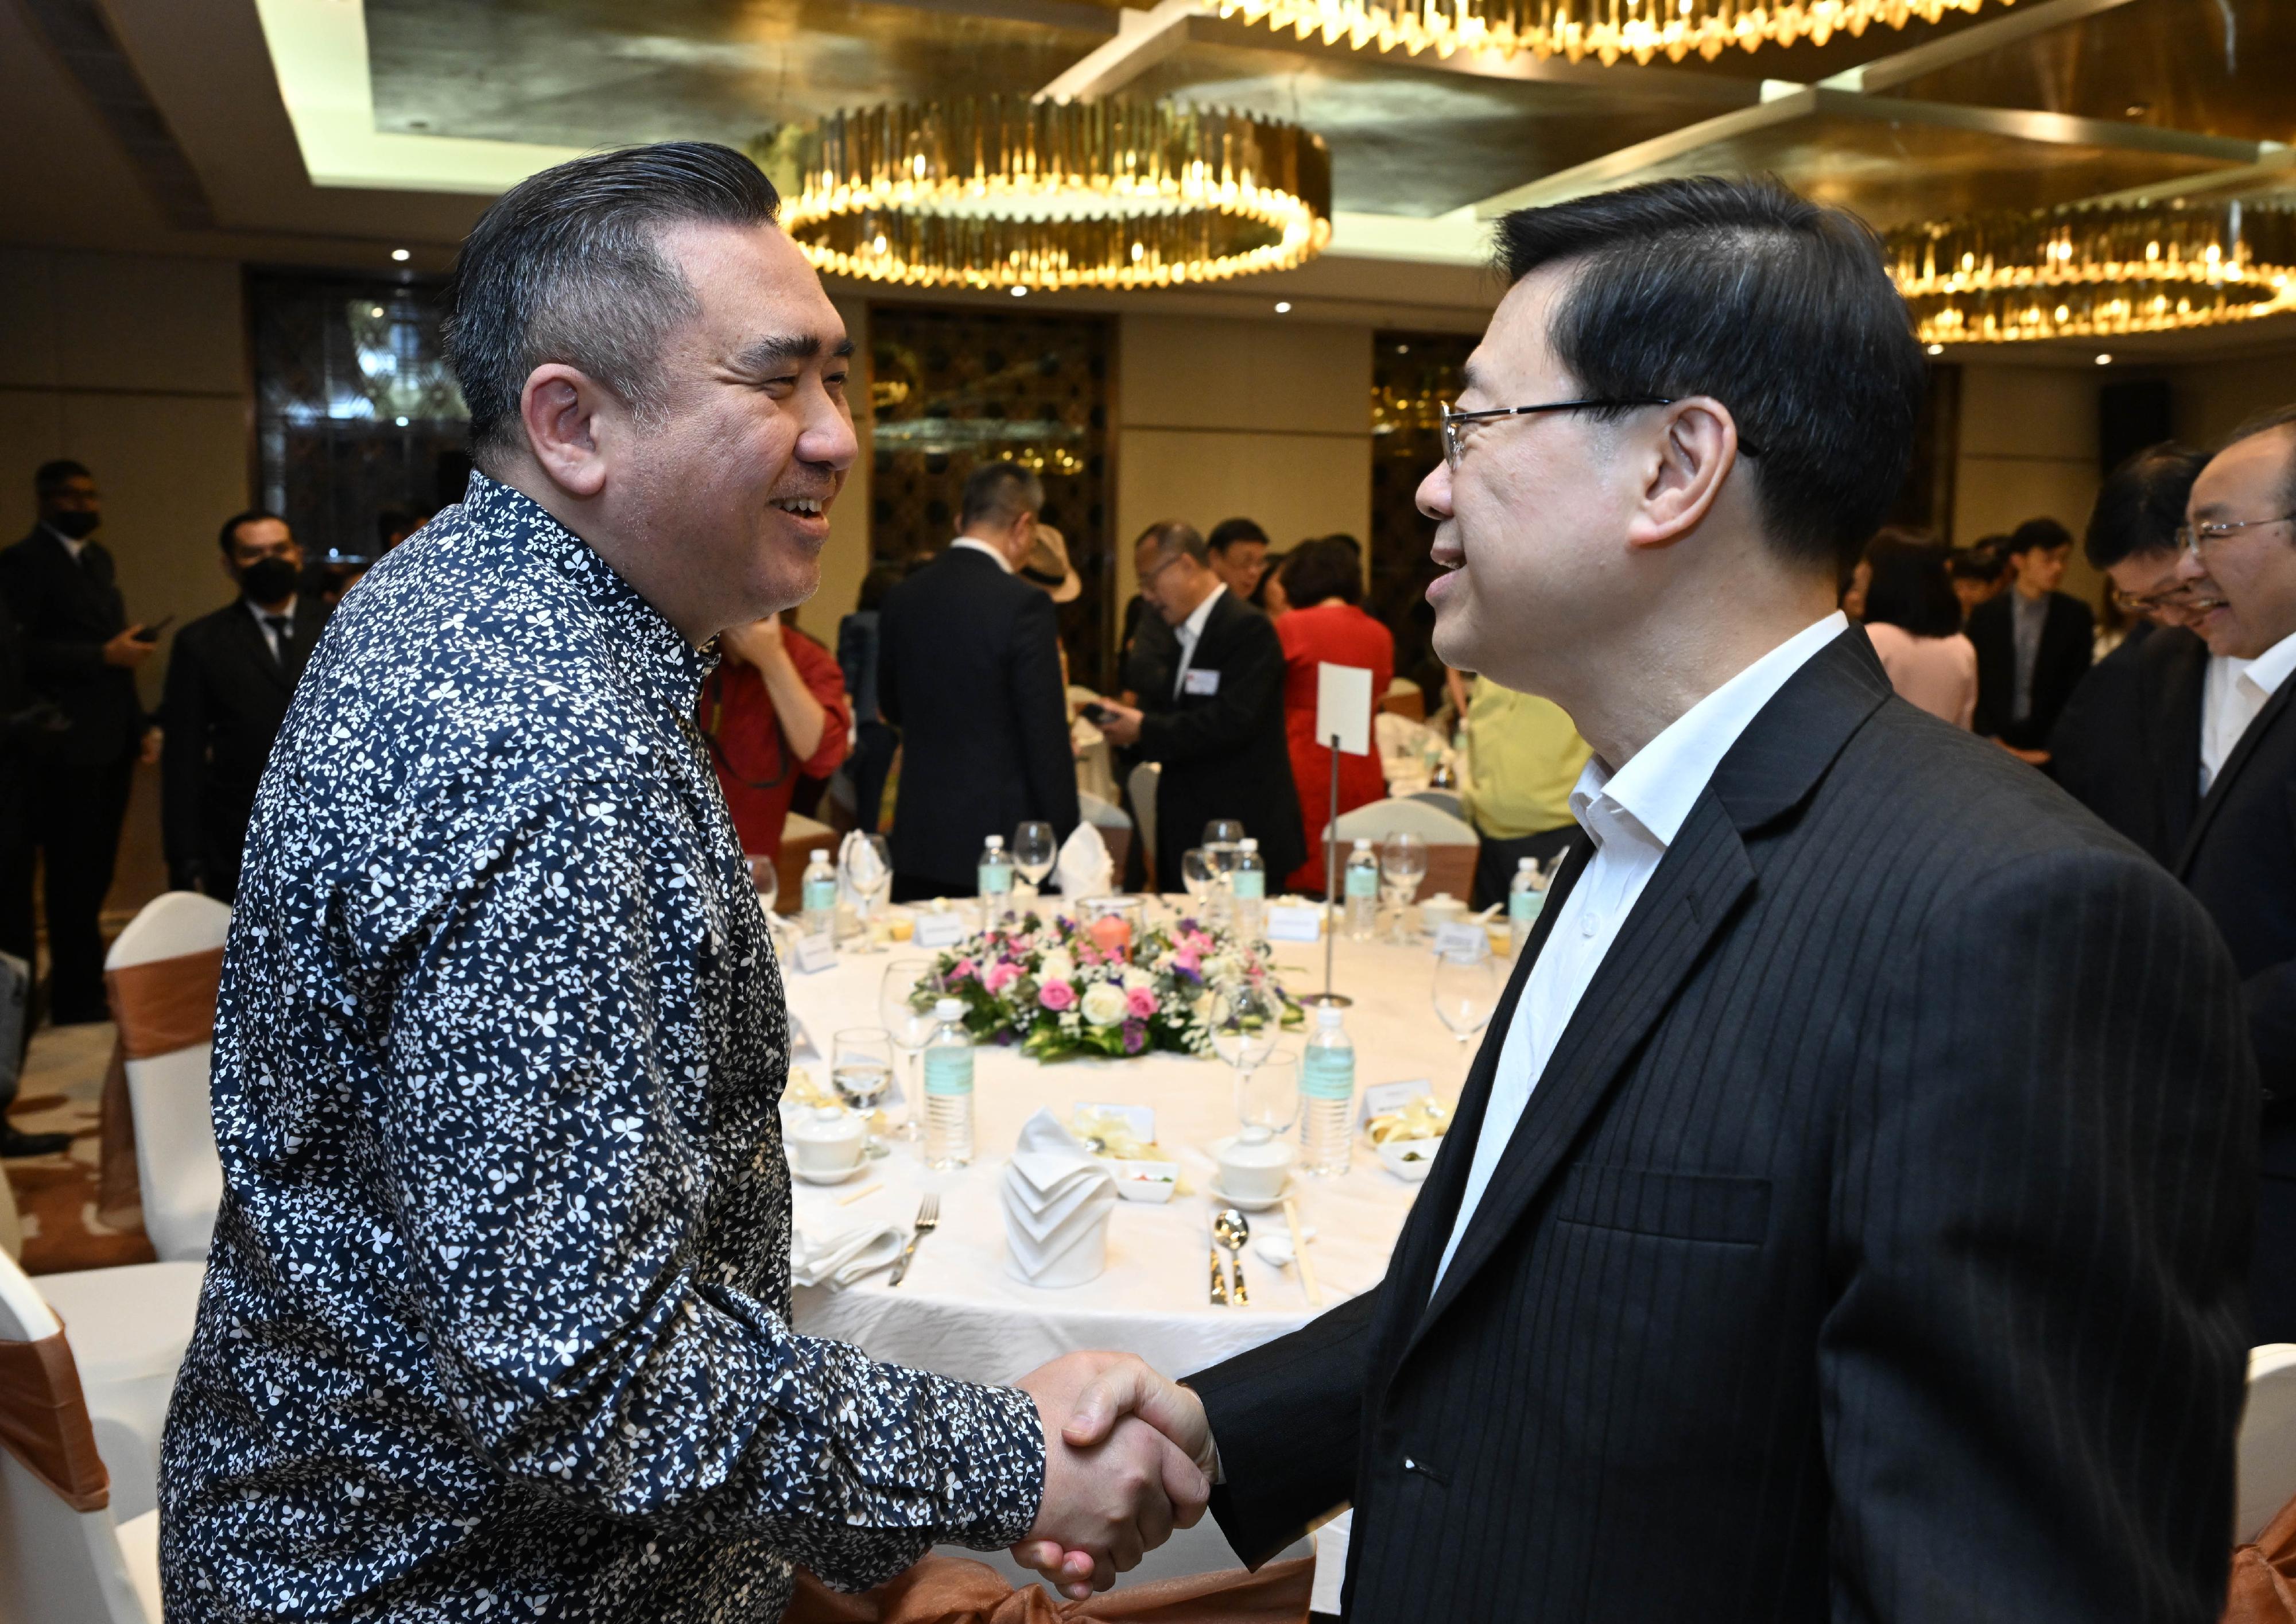 The Chief Executive, Mr John Lee, and the Hong Kong Special Administrative Region delegation attended a business dinner in Kuala Lumpur, Malaysia today (July 28). Photo shows Mr Lee (right) chatting with the Minister of Transport of Malaysia, Mr Loke Siew Fook (left), at the dinner.